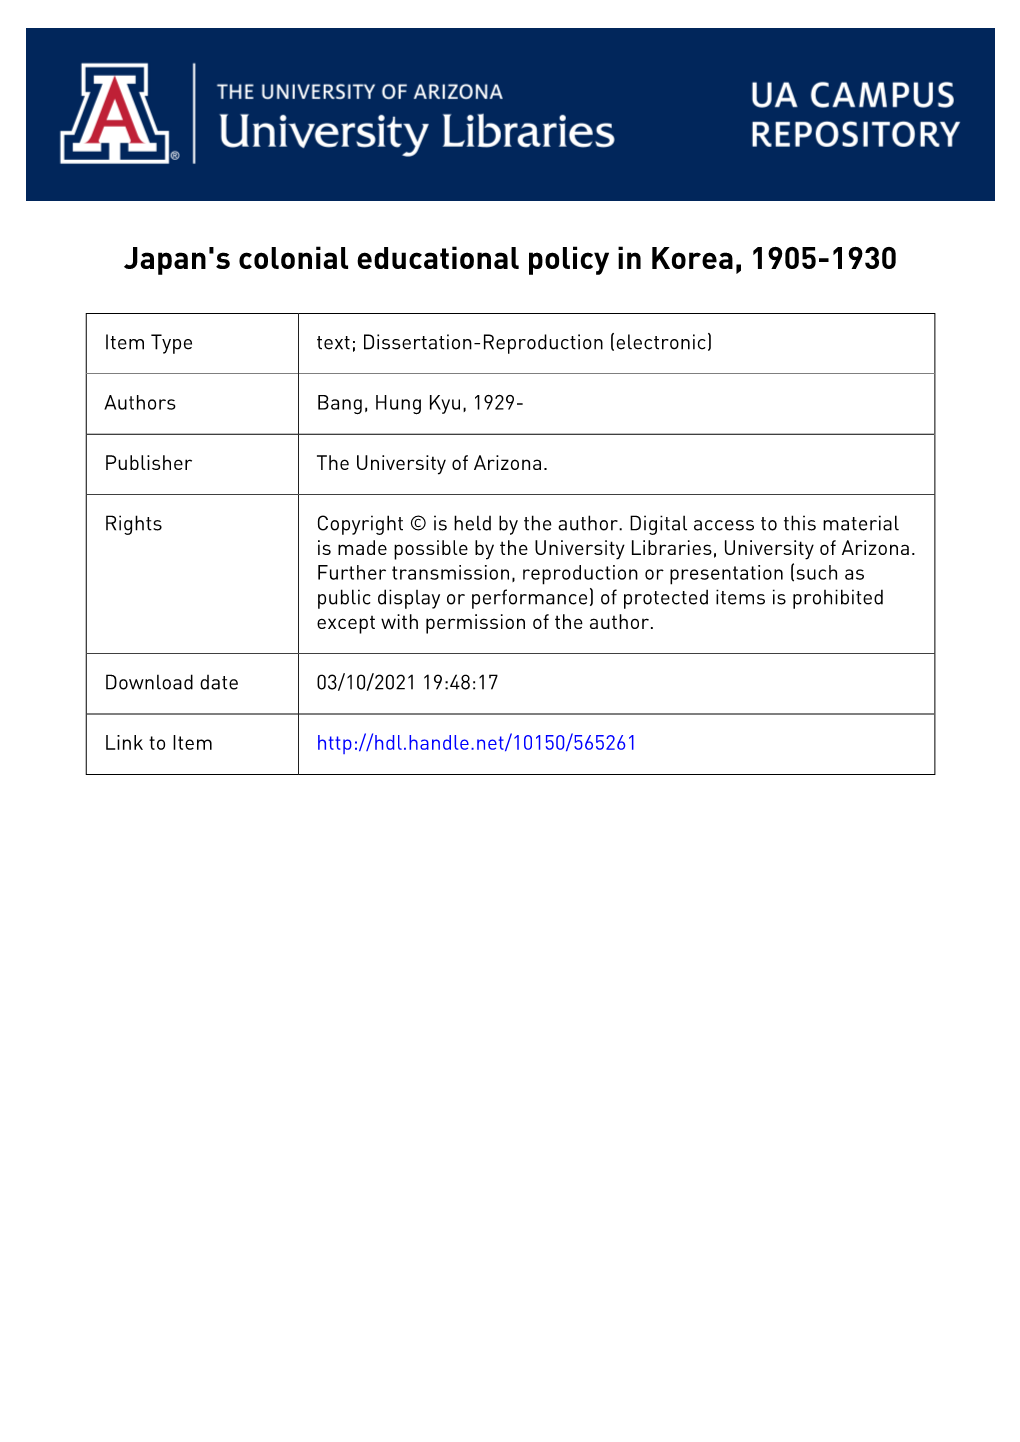 JAPAN's COLONIAL EDUCATIONAL POLICY in KOREA by Hung Kyu